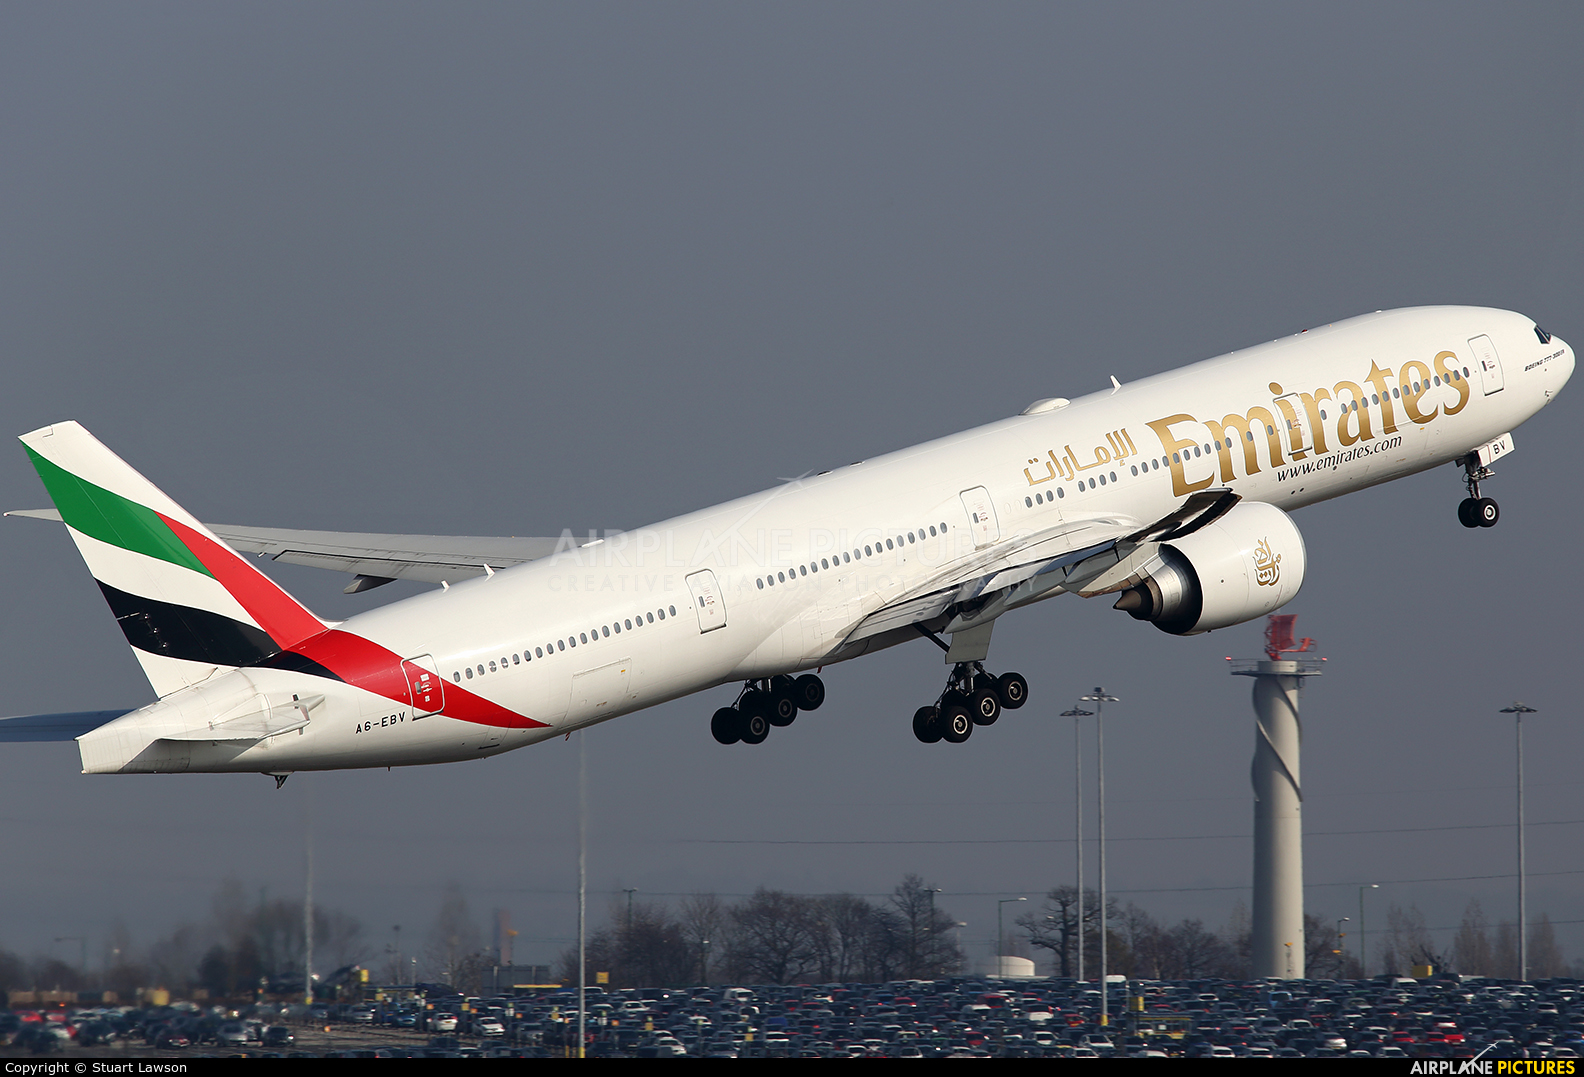 Emirates Airlines A6-EBV aircraft at Birmingham